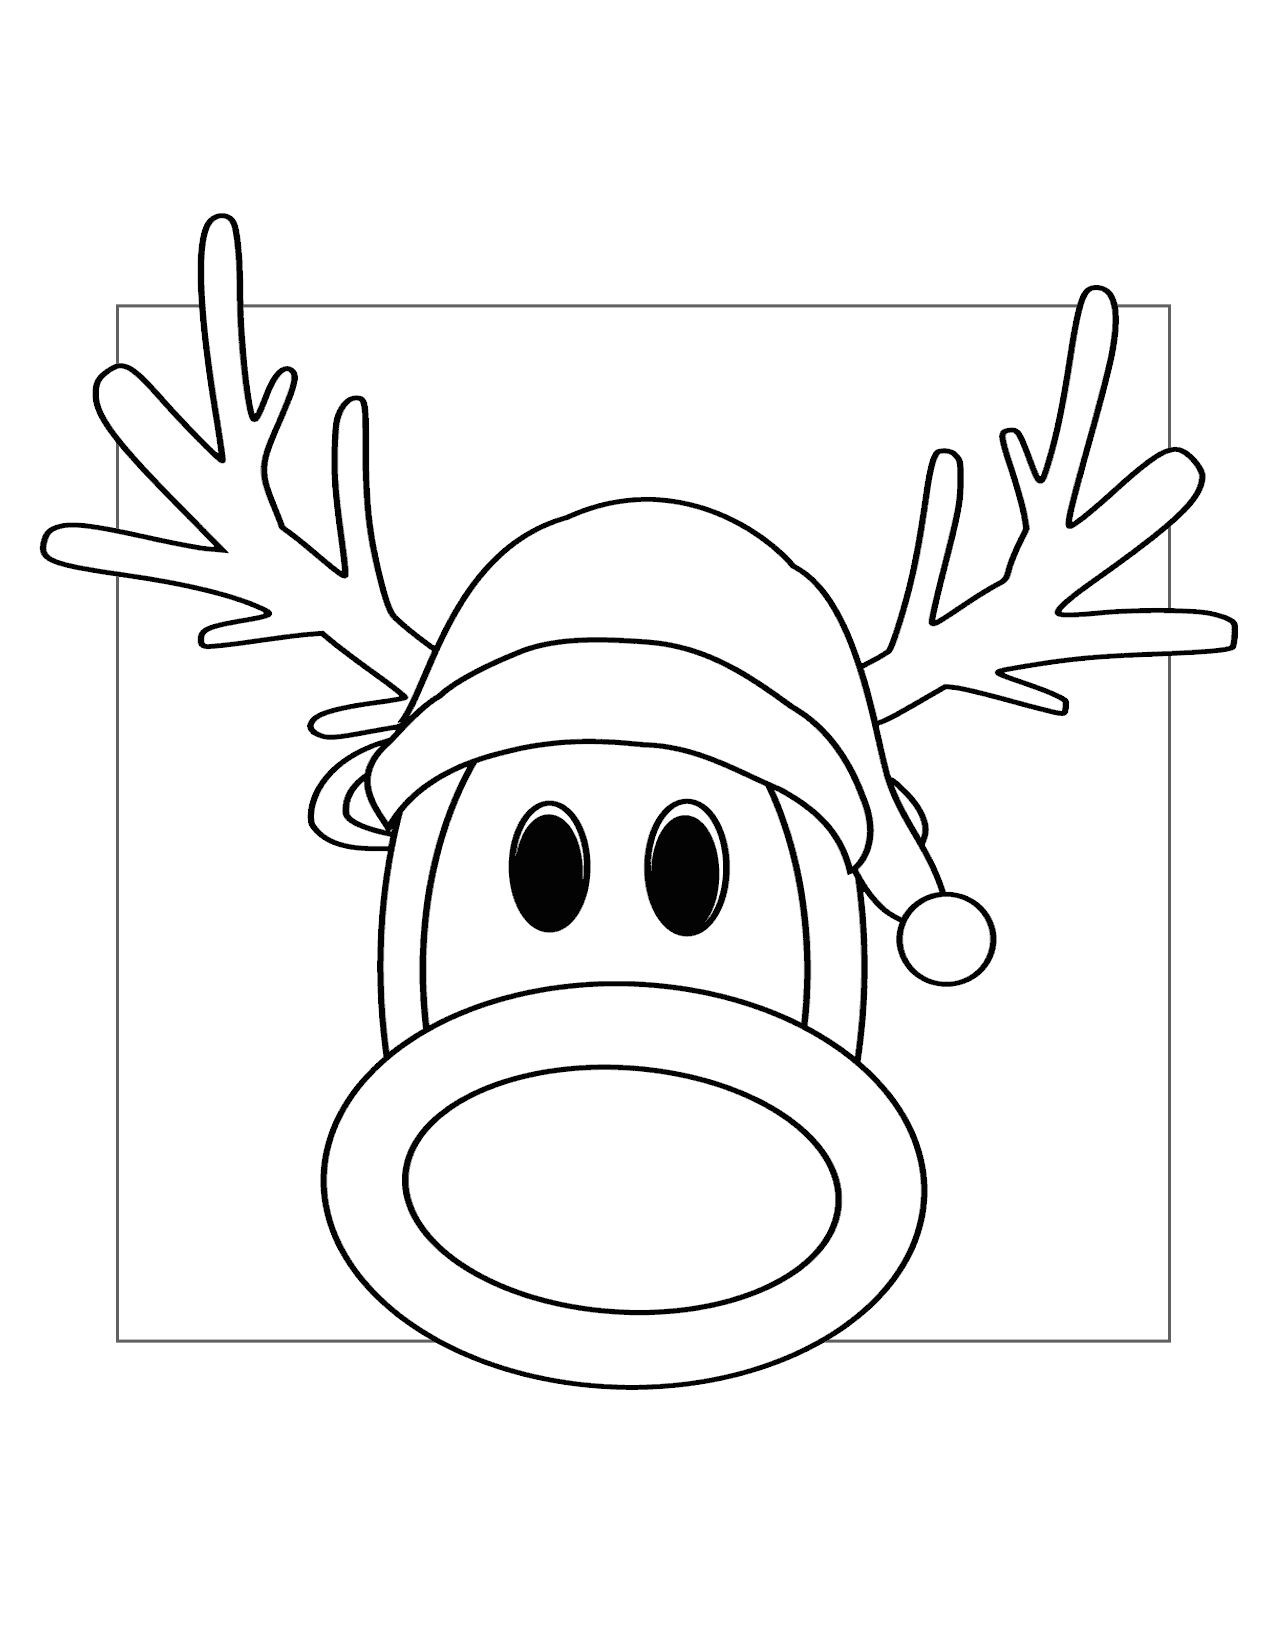 Cute Reindeer With Big Nose Coloring Page